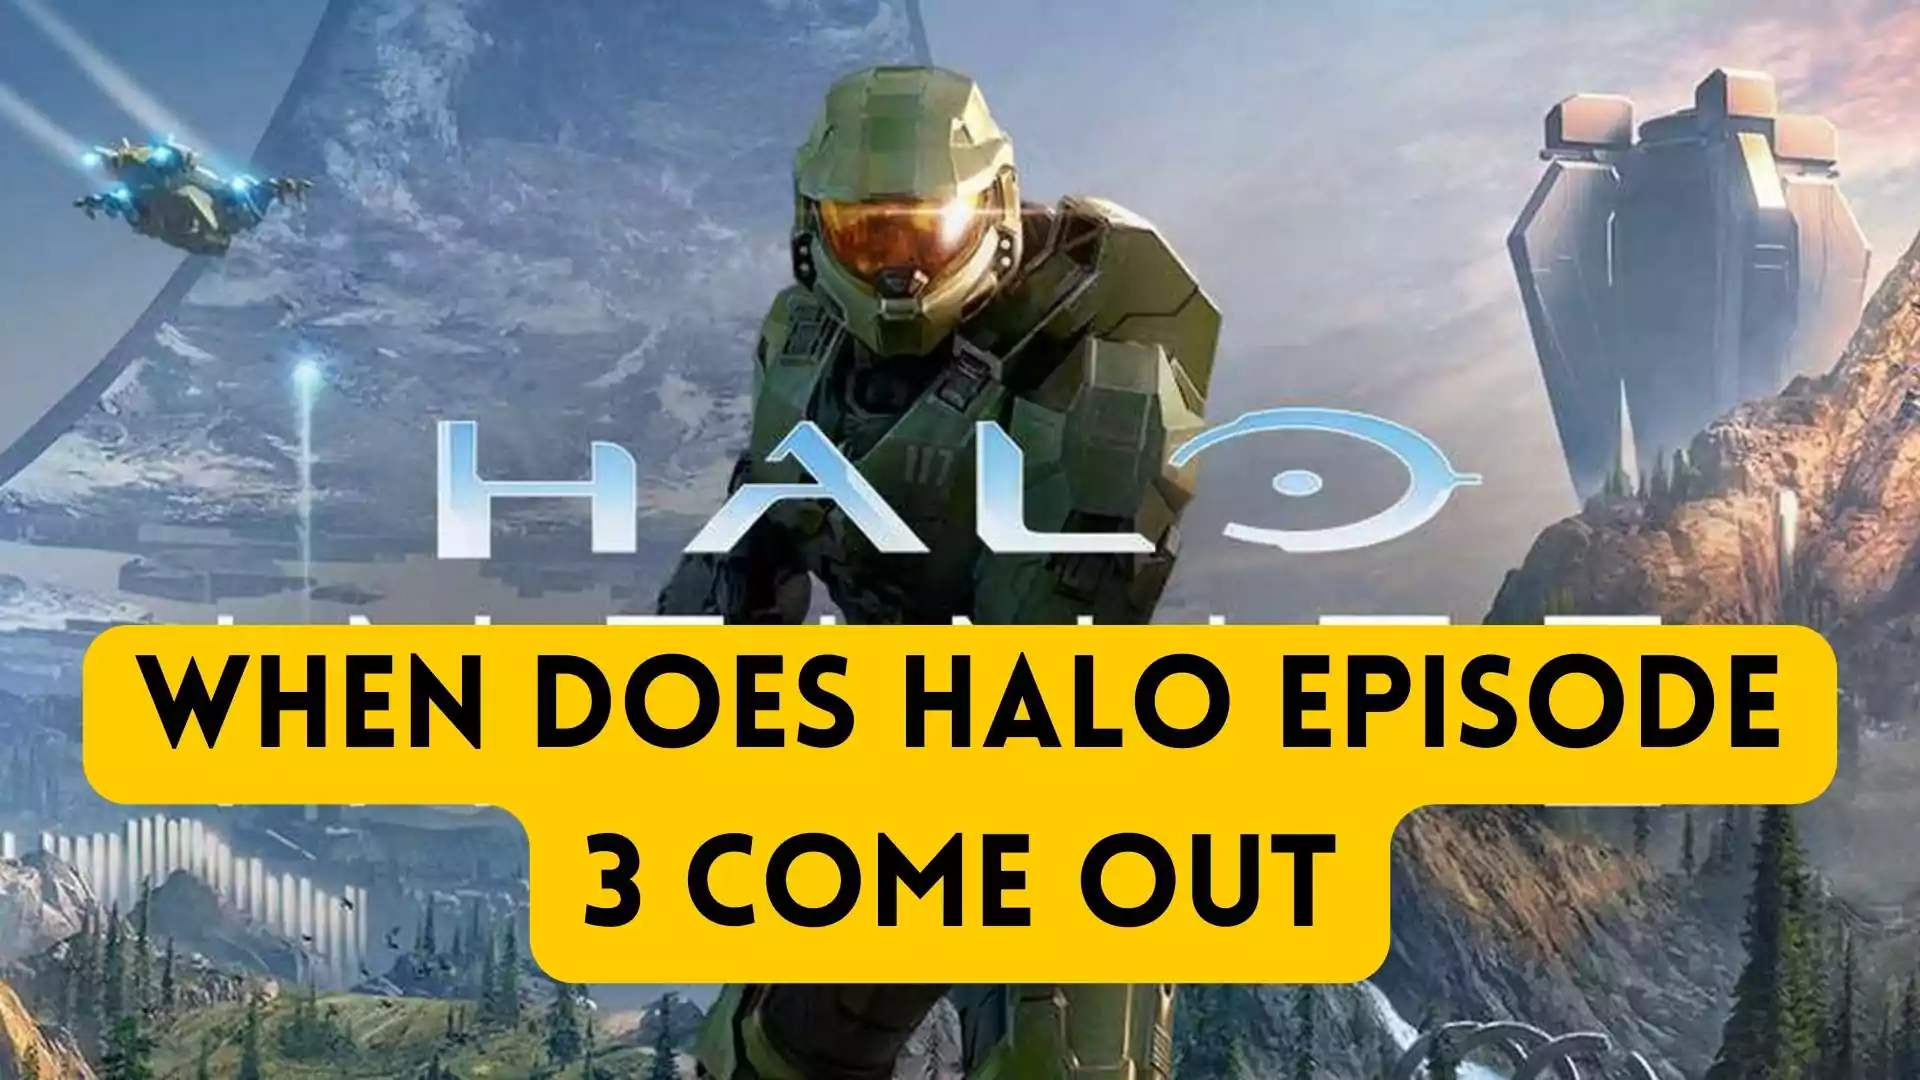 When Does Halo Episode 3 Come Out. When Does Halo Episode 3 Come Out. When does the next episode of Halo Come Out. When is the next Halo episode.